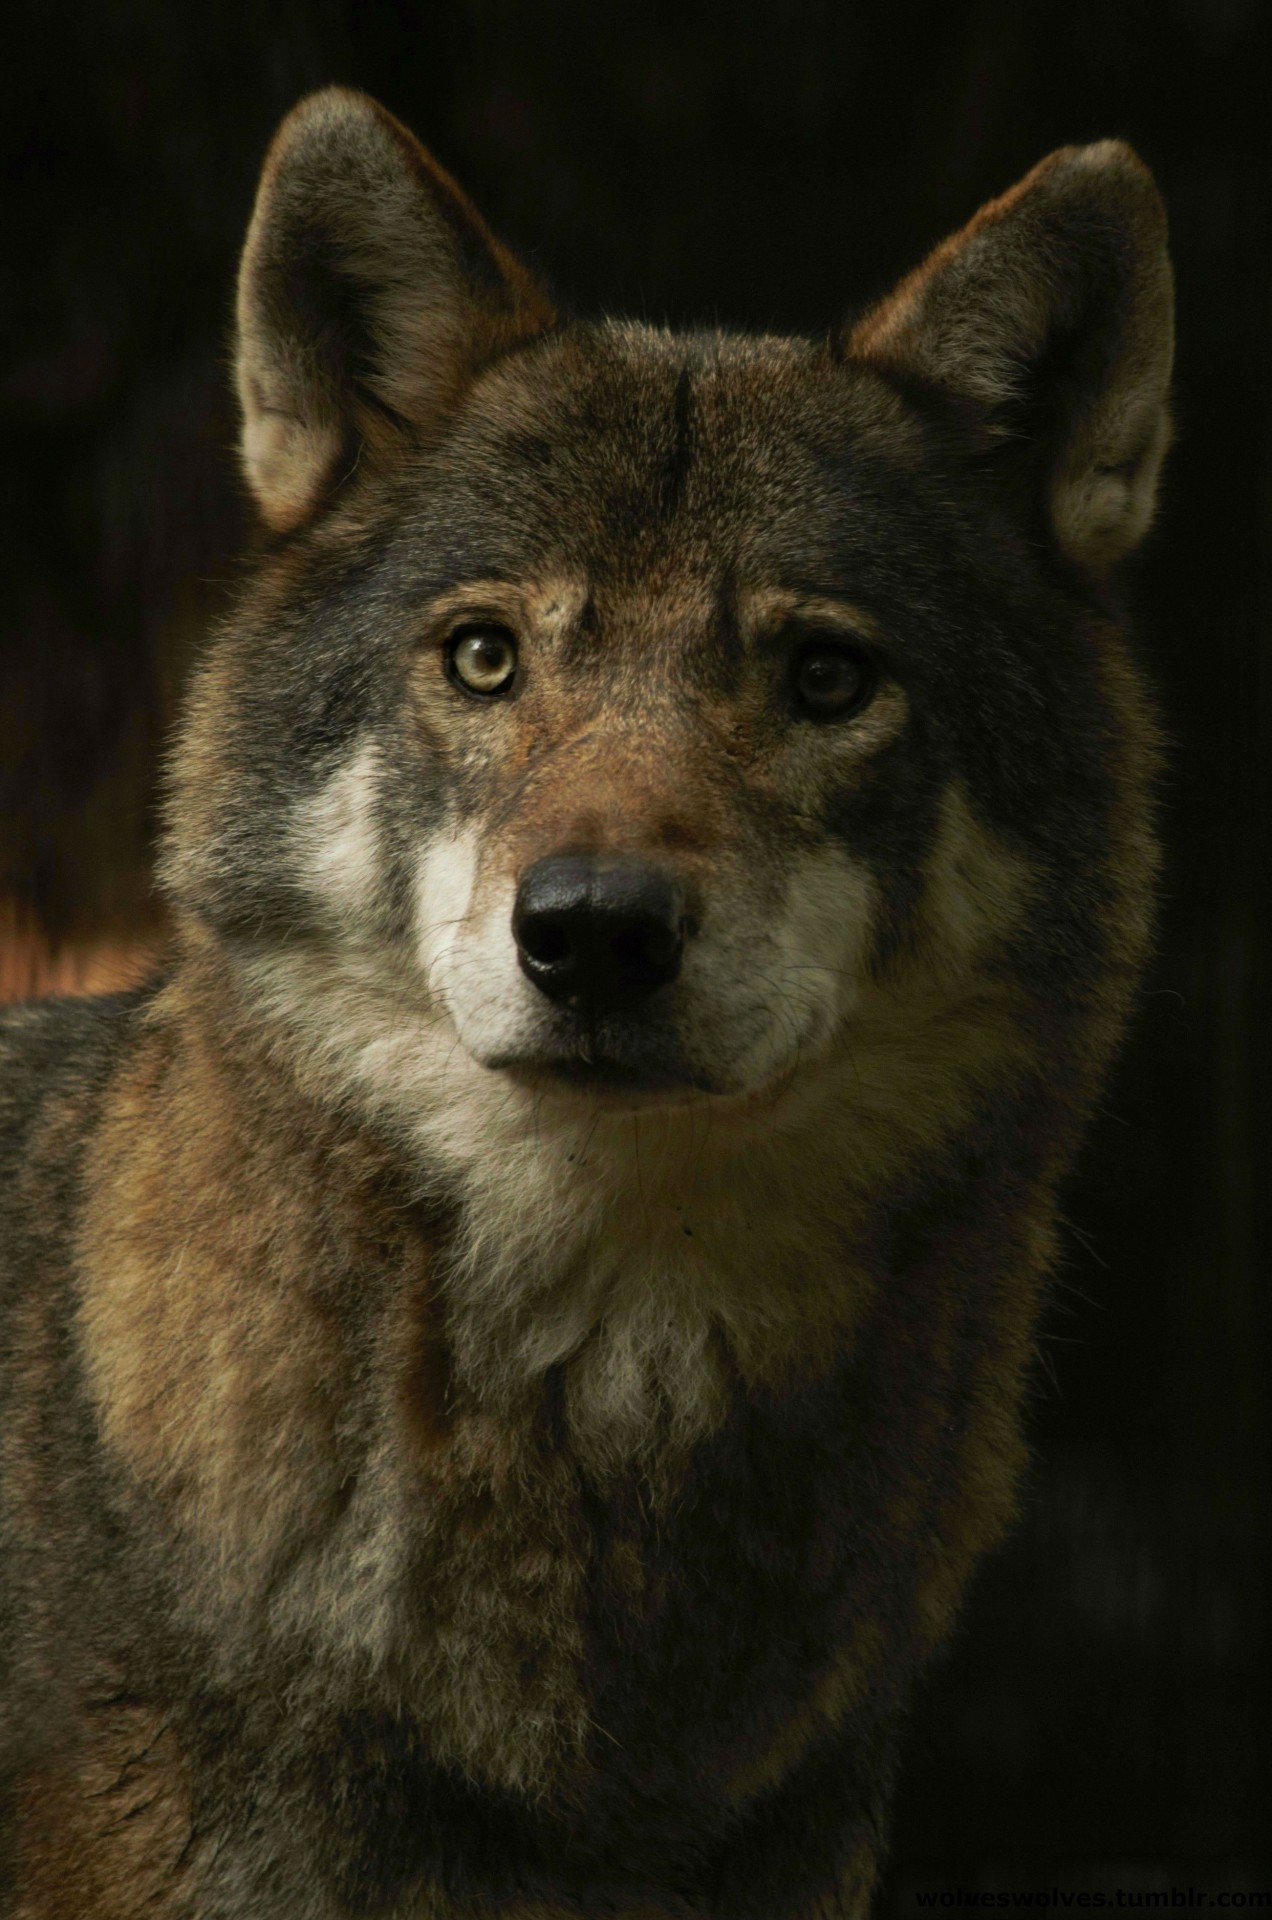 wolveswolves:
“European wolf (Canis lupus lupus) by wolveswolves
”